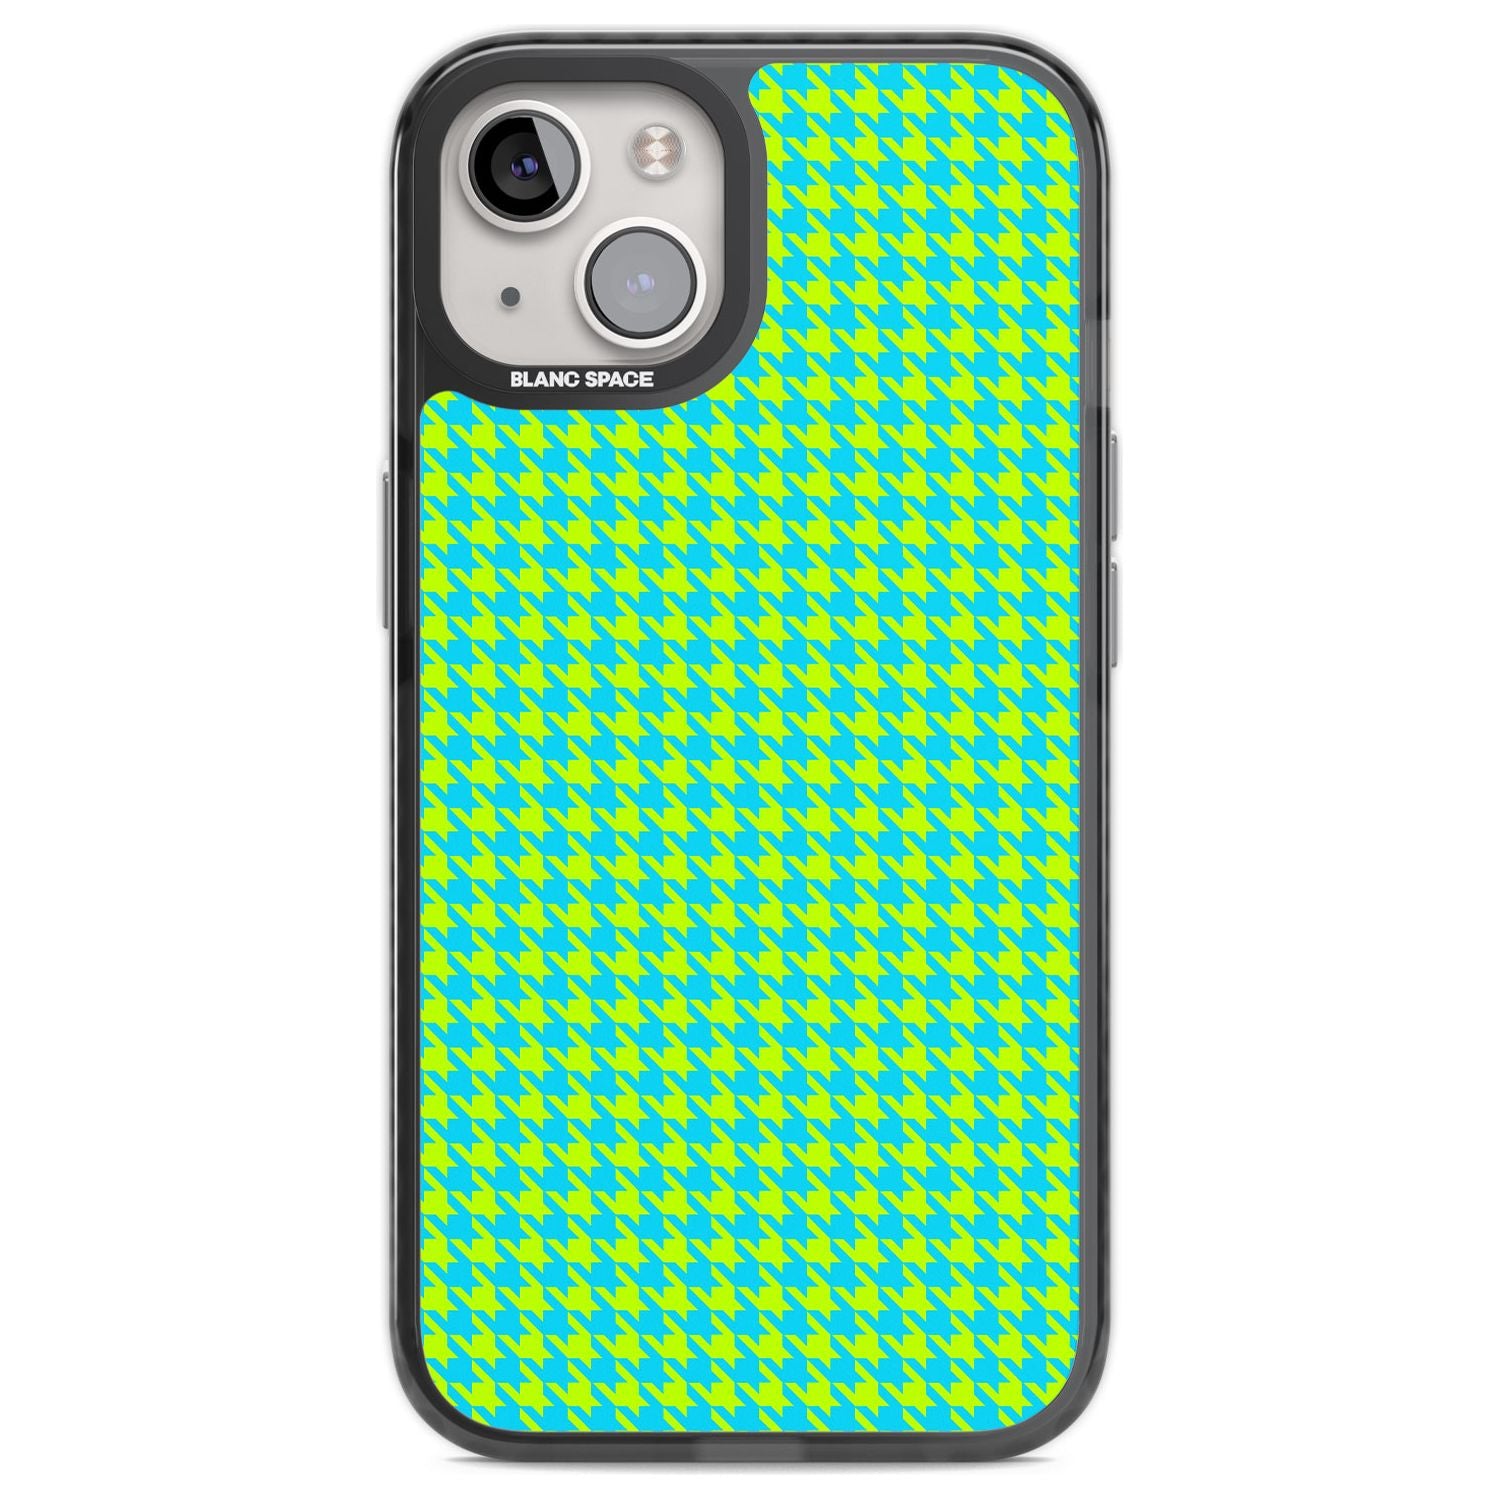 Neon Lime & Turquoise Houndstooth Pattern Phone Case iPhone 12 / Black Impact Case,iPhone 13 / Black Impact Case,iPhone 12 Pro / Black Impact Case,iPhone 14 / Black Impact Case,iPhone 15 Plus / Black Impact Case,iPhone 15 / Black Impact Case Blanc Space